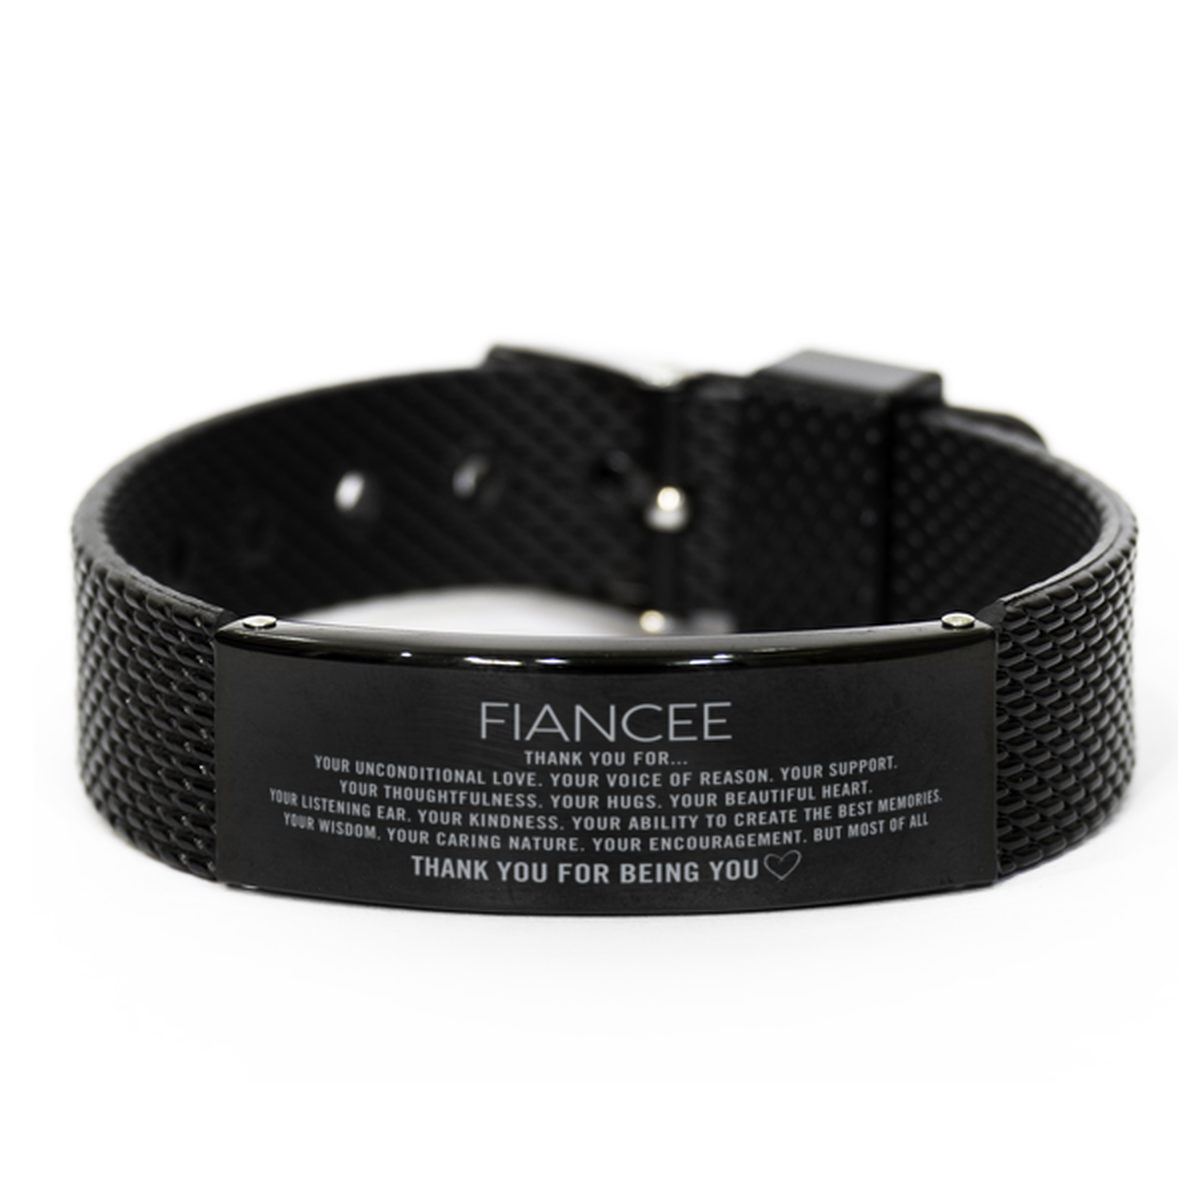 Fiancee Black Shark Mesh Bracelet Custom, Engraved Gifts For Fiancee Christmas Graduation Birthday Gifts for Men Women Fiancee Thank you for Your unconditional love